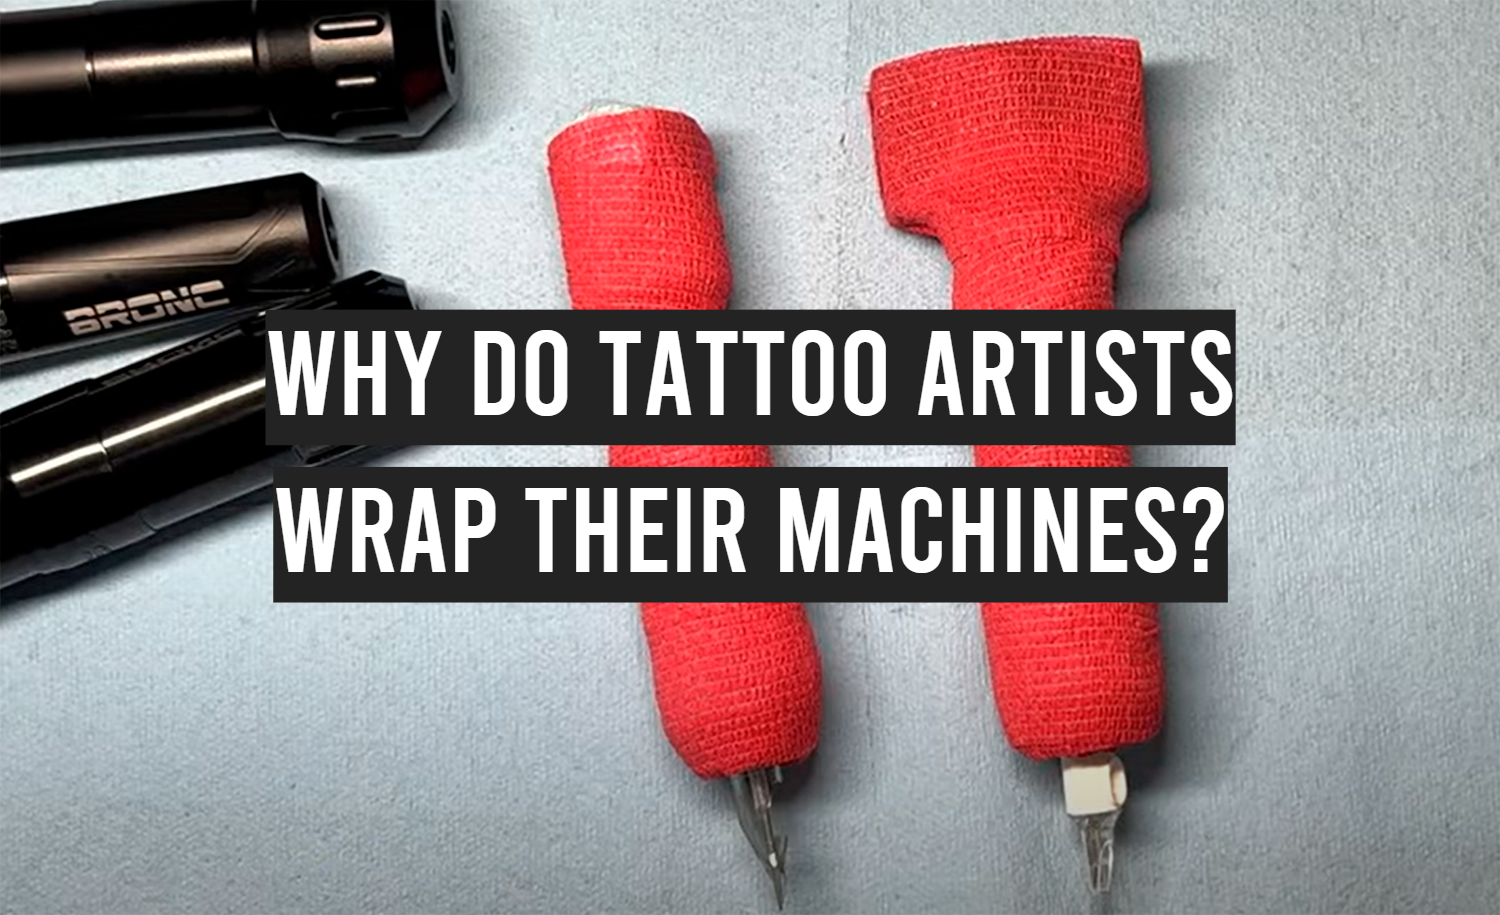 Why Do Tattoo Artists Wrap Their Machines?